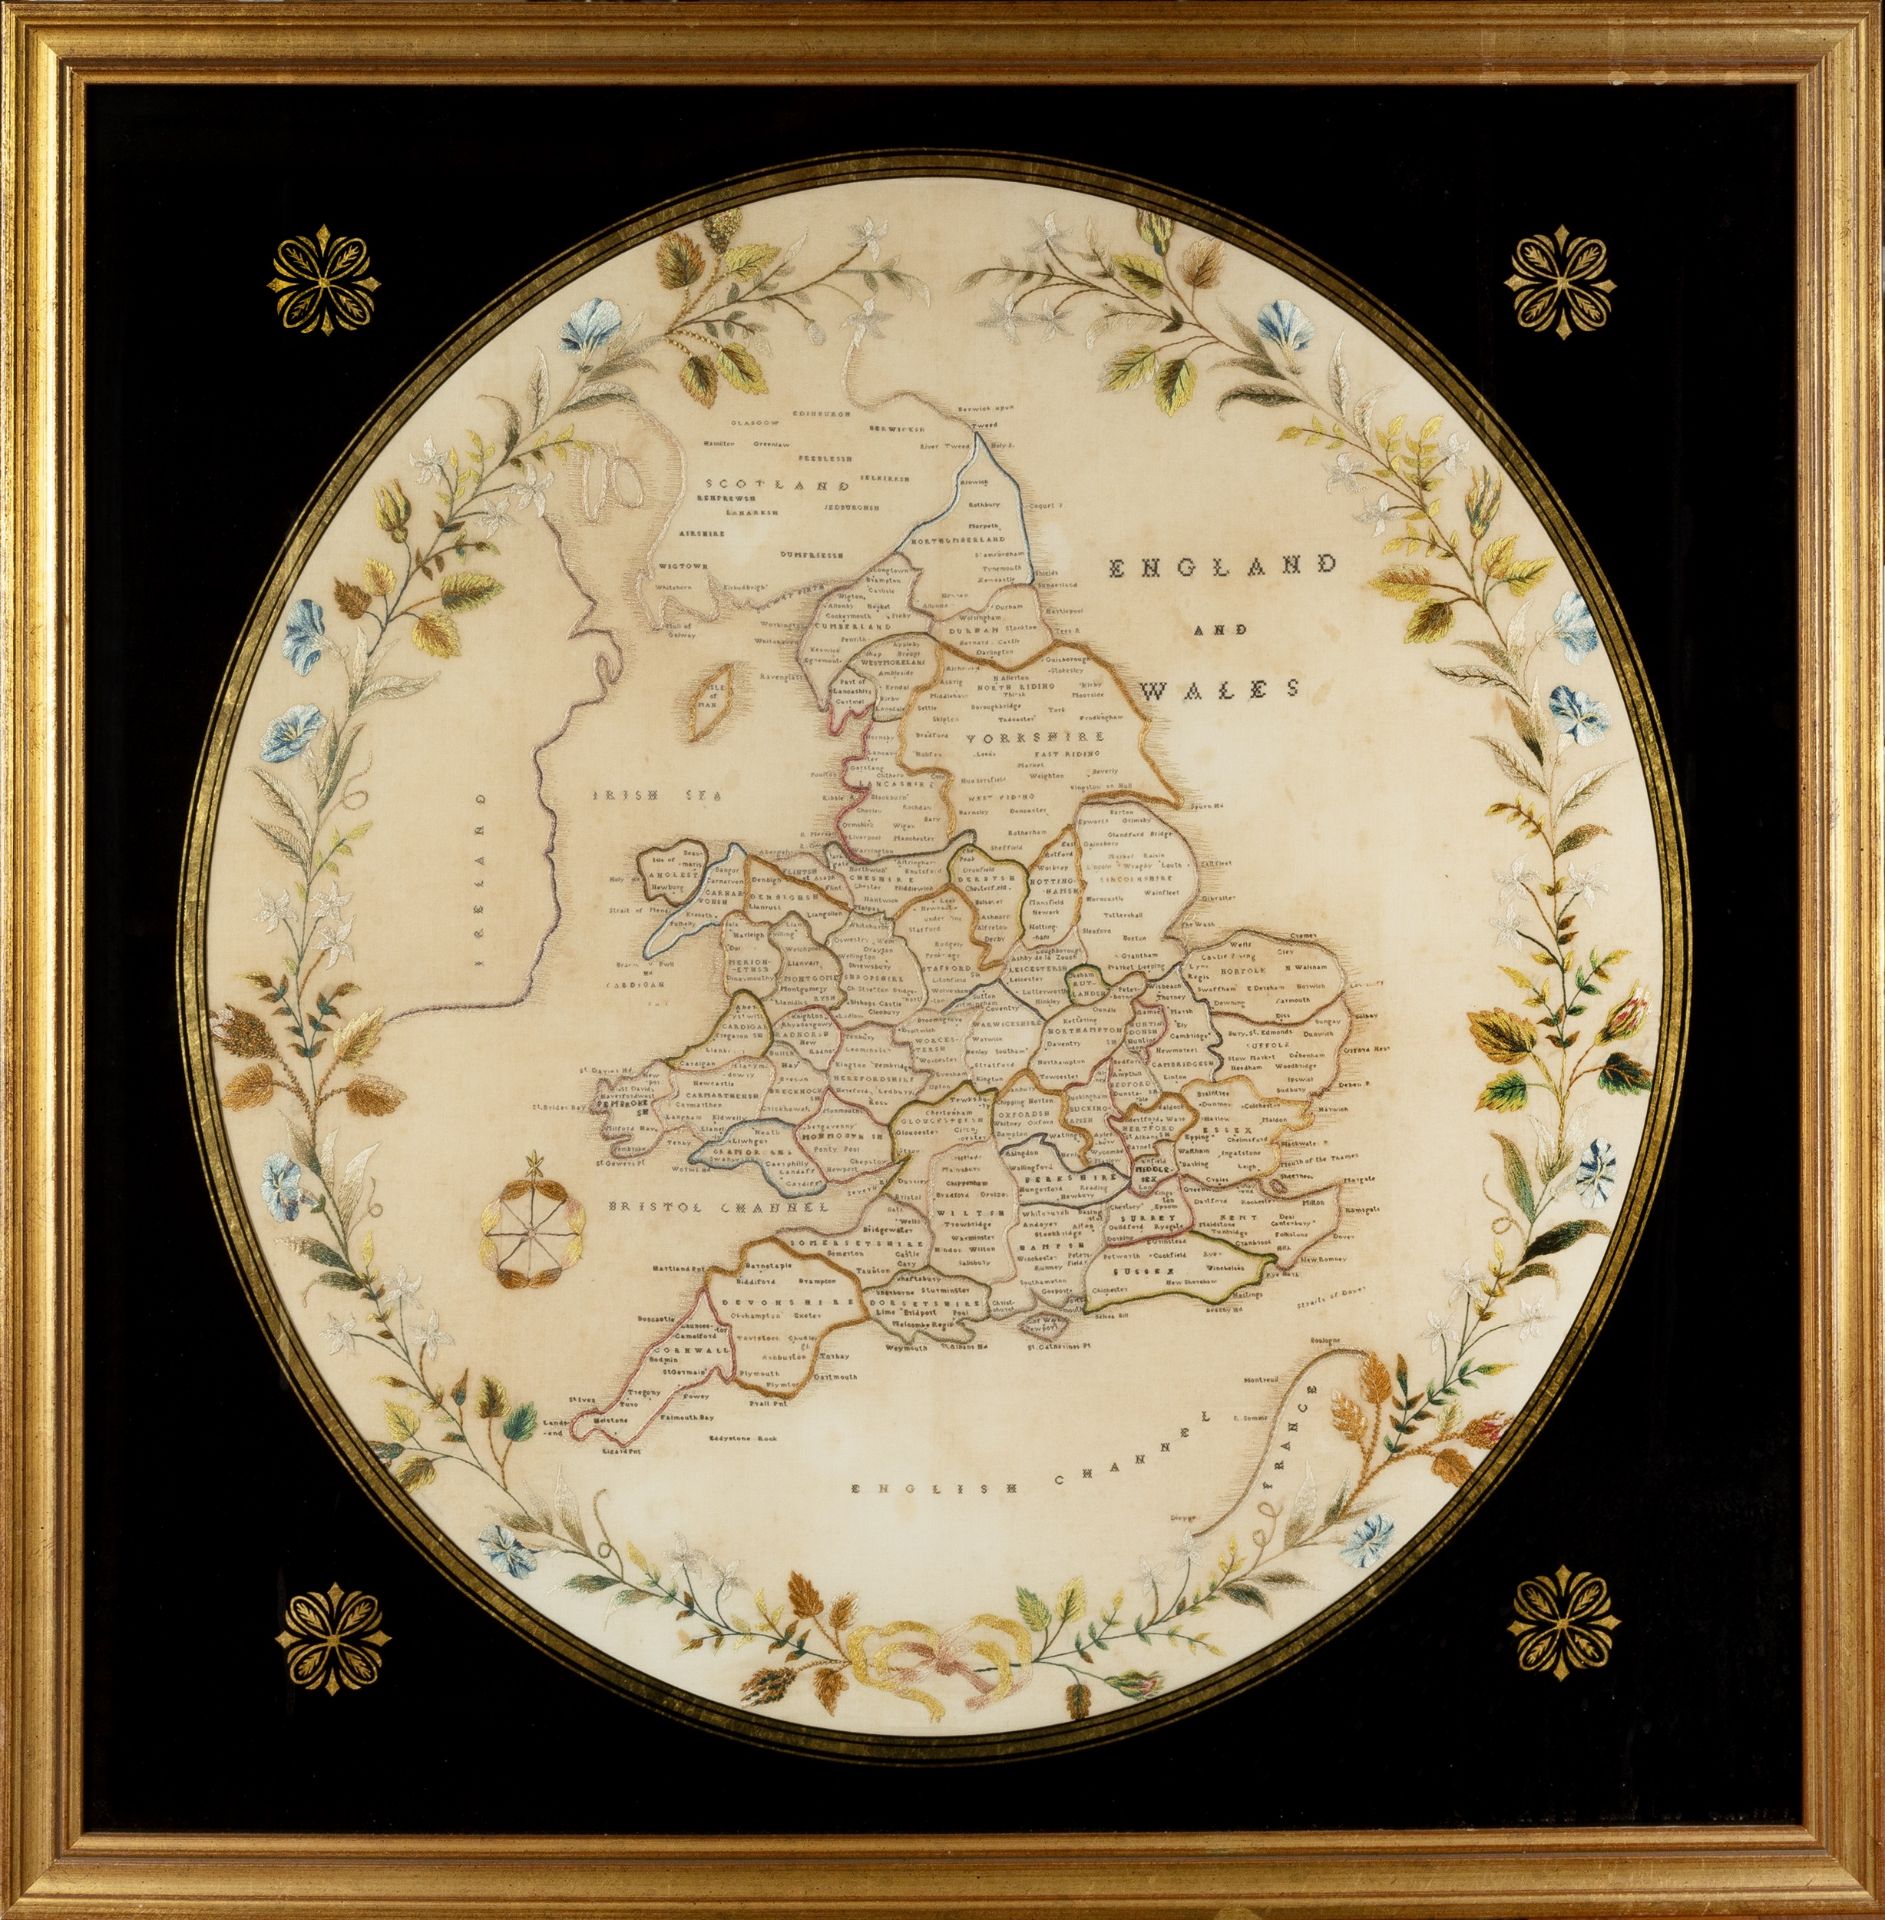 A 19th century embroidered map of England and Wales with a floral border 54cm diameter. mounted in a